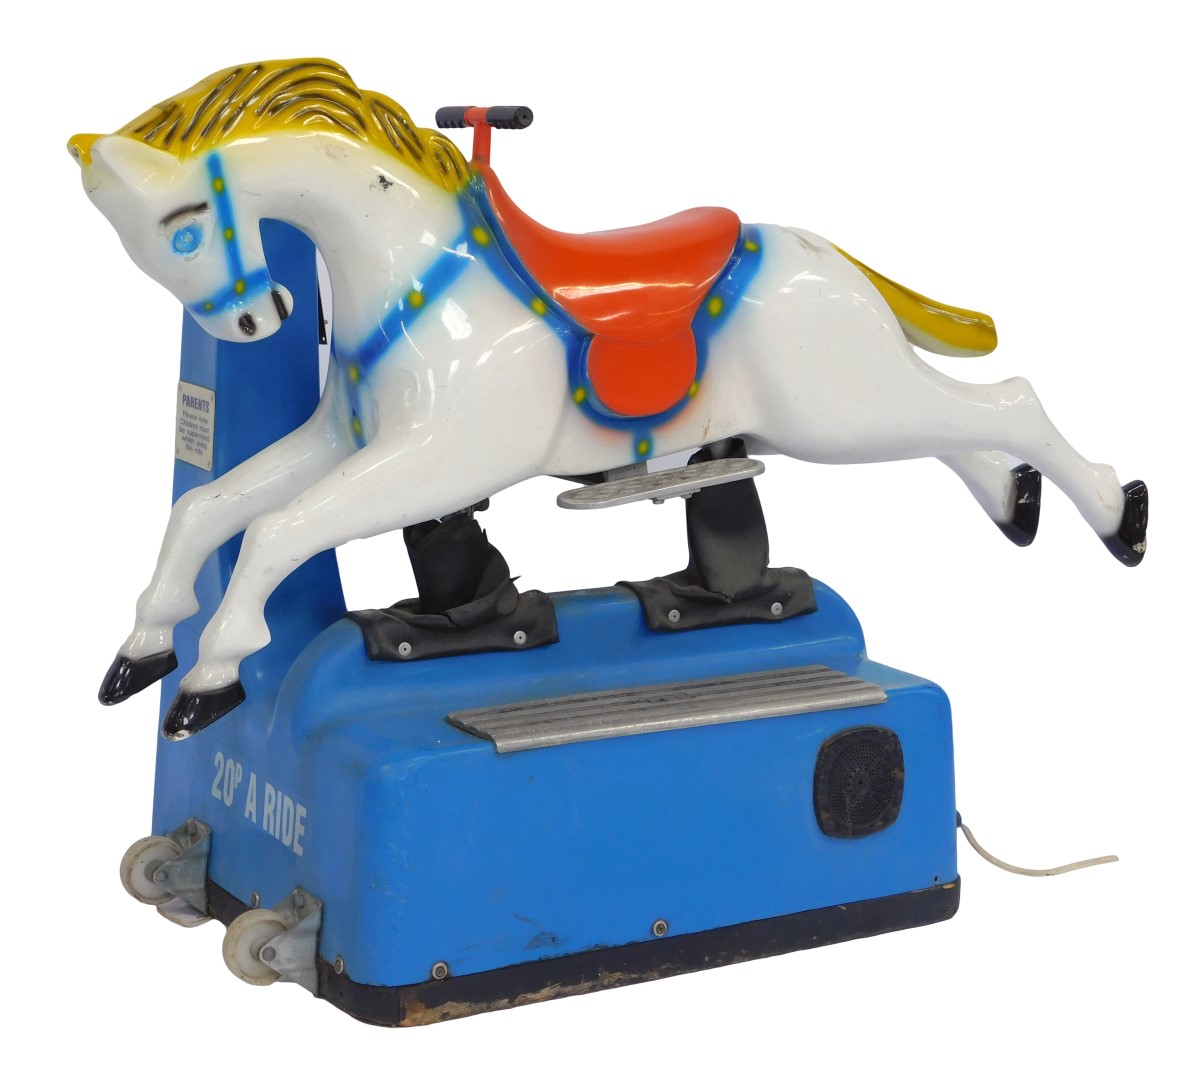 A Mitchell's RGM fairground horse ride, on a blue base with coin payment section, the plastic horse